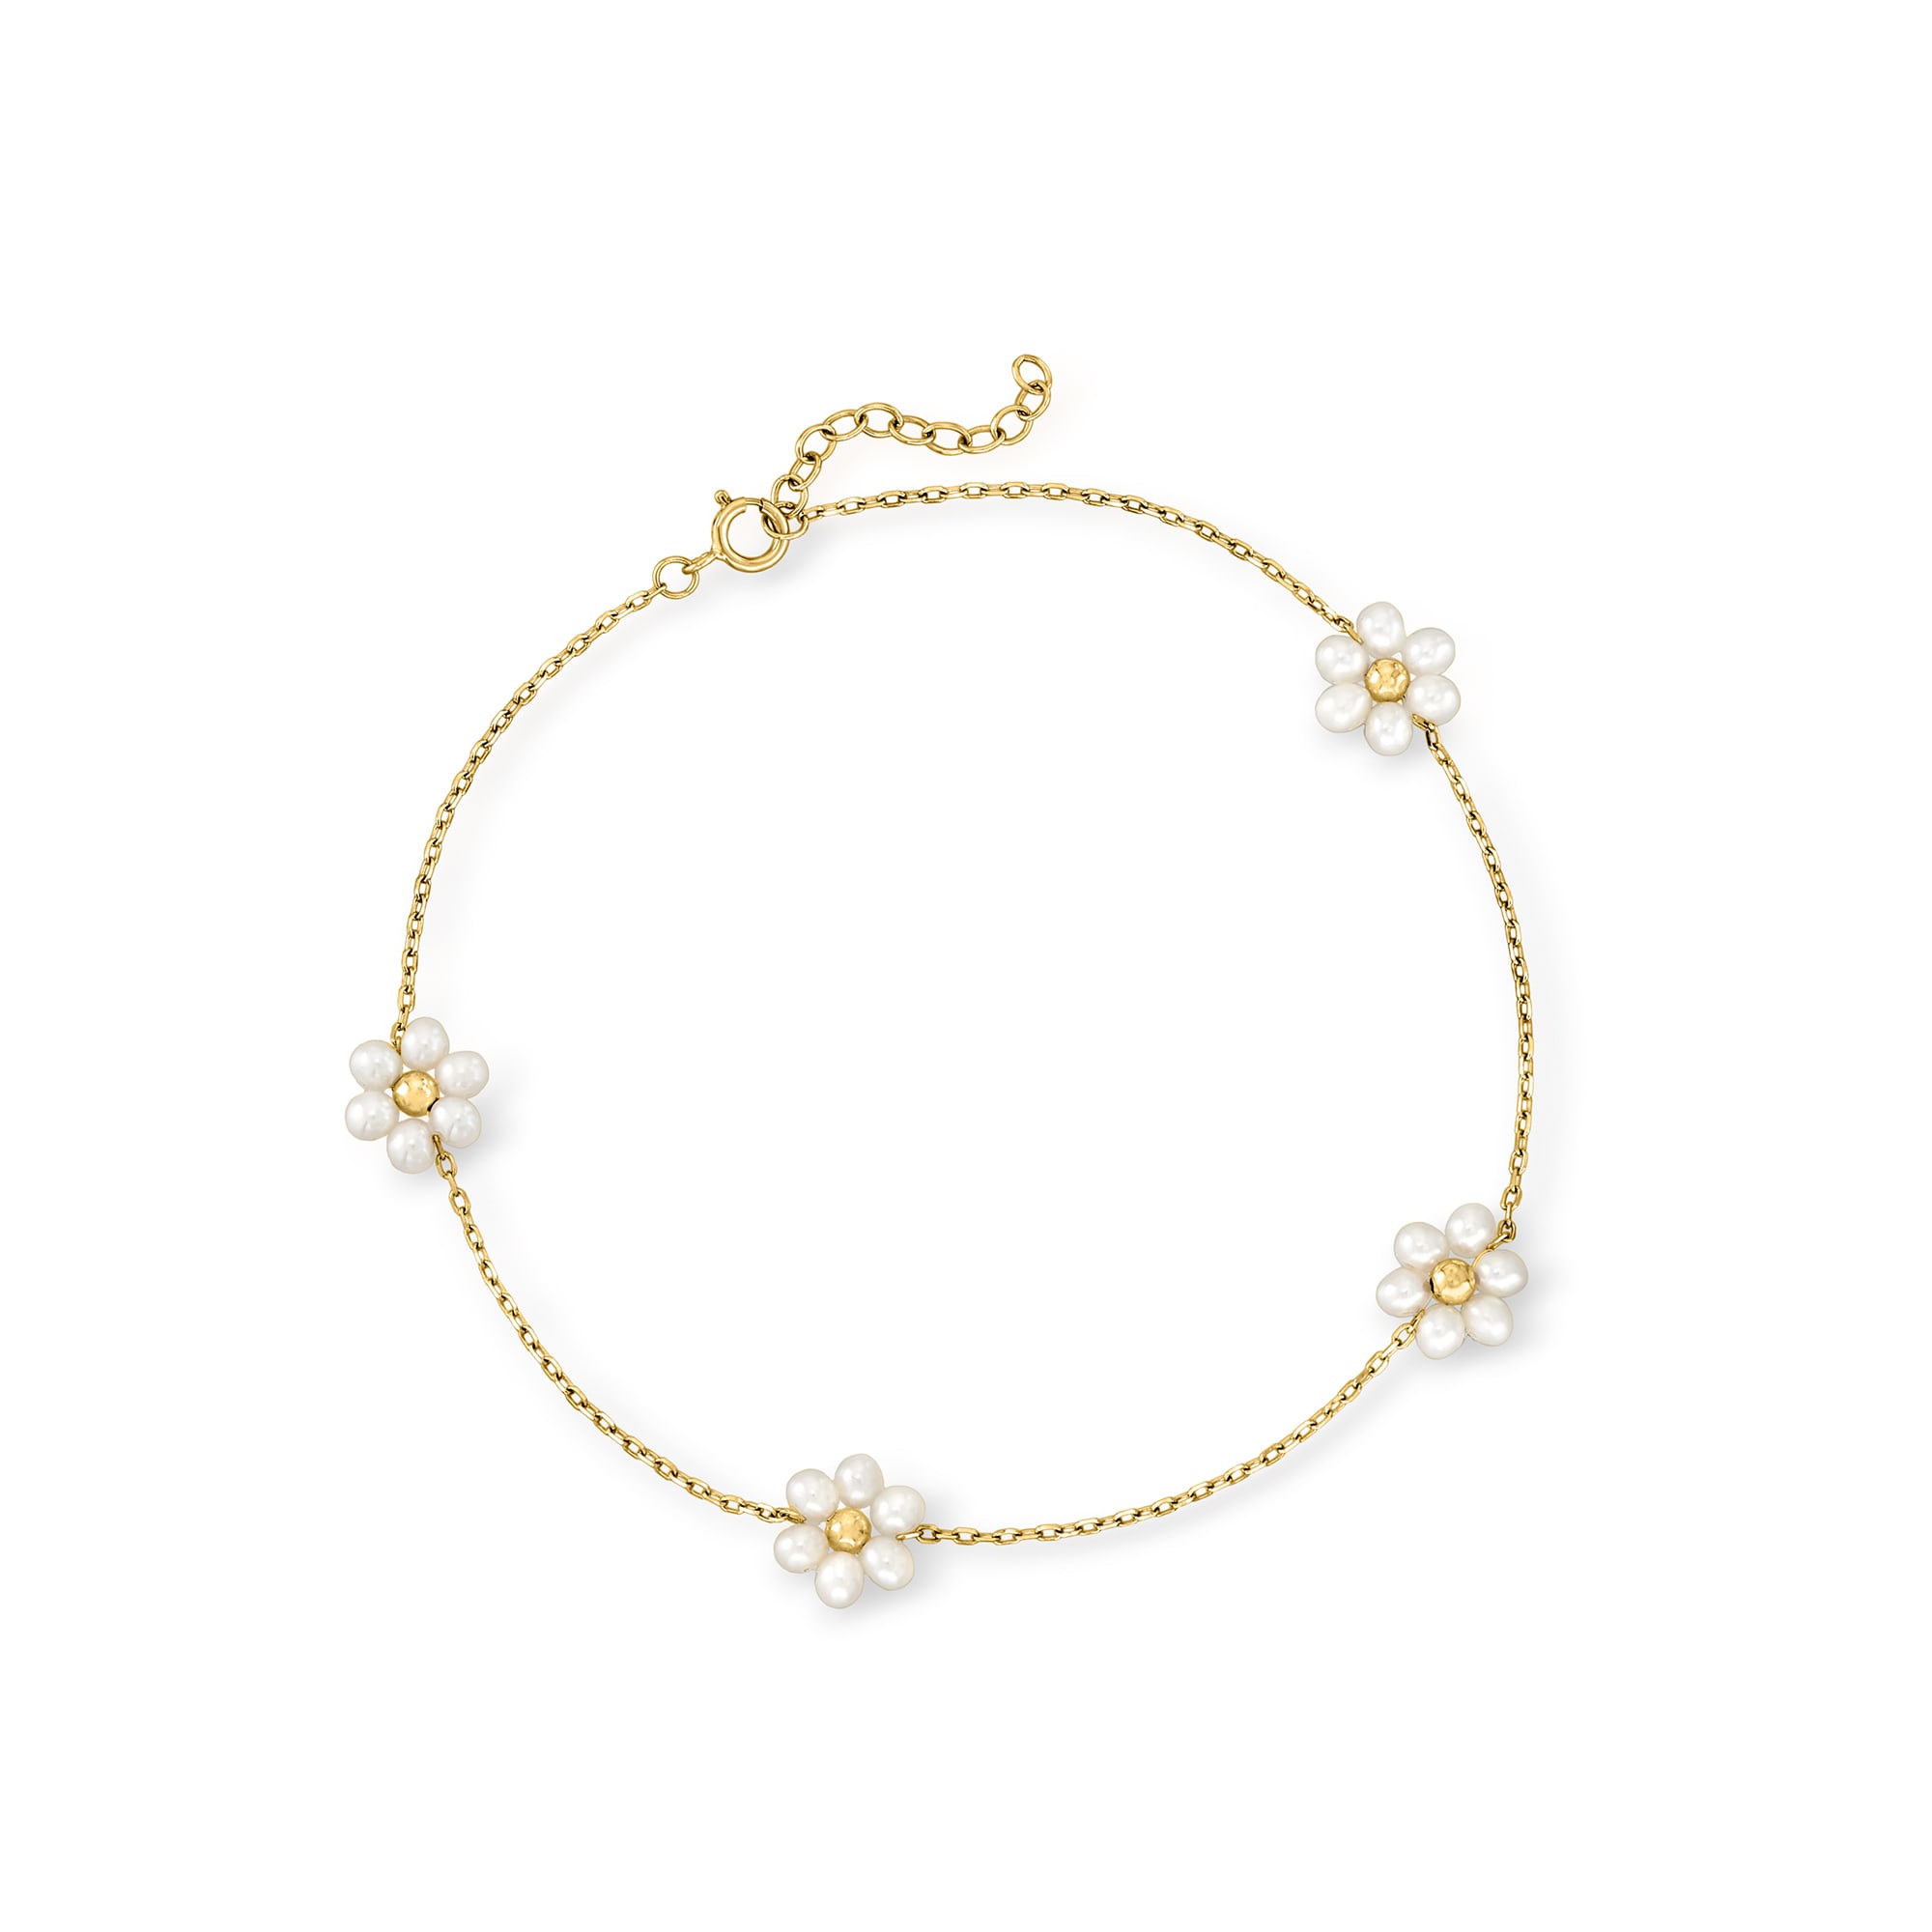 3-3.5mm Cultured Pearl Flower Station Anklet in 14kt Yellow Gold. 9 ...